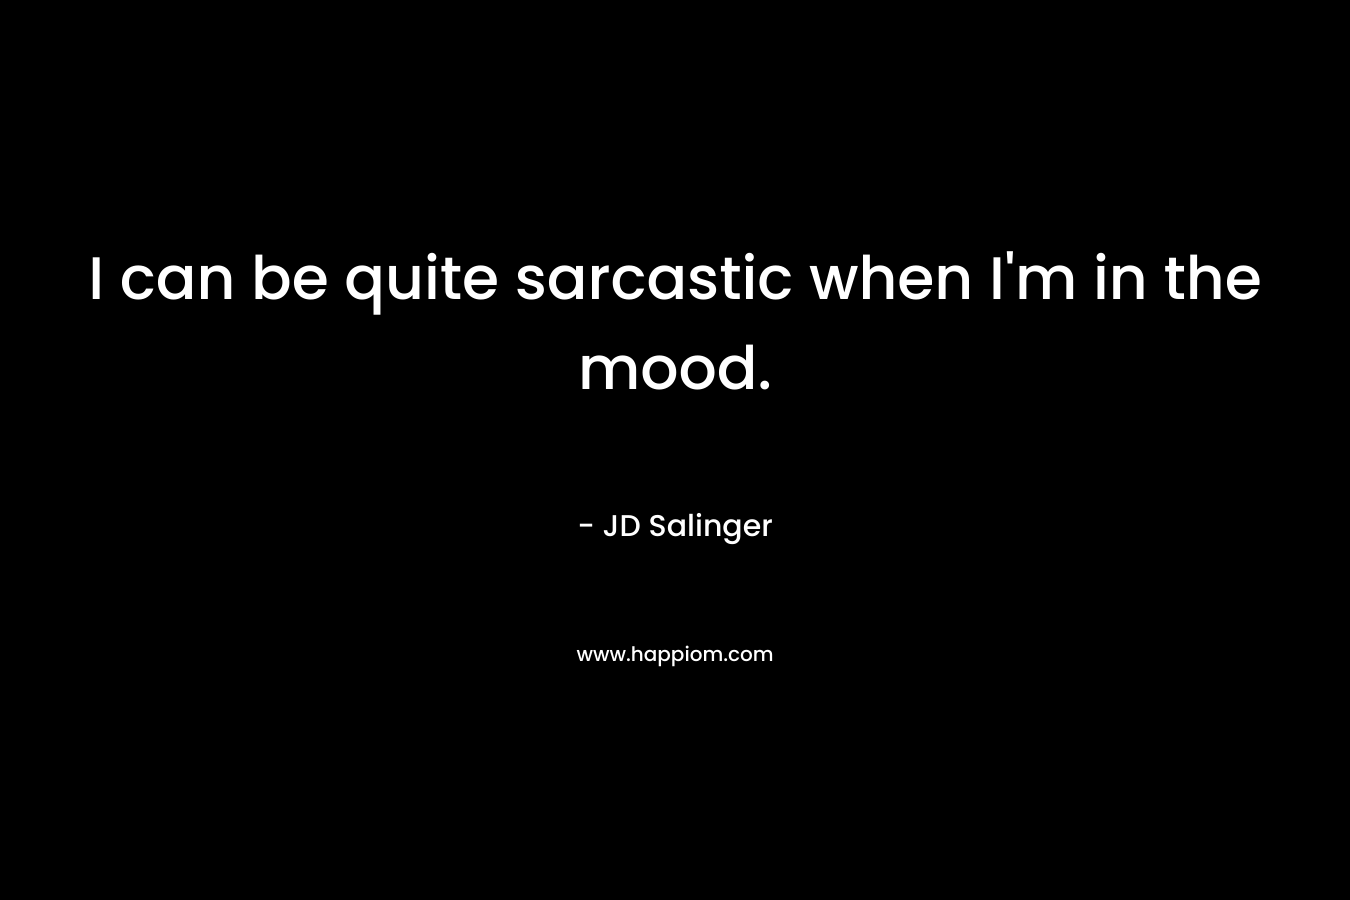 I can be quite sarcastic when I’m in the mood. – JD Salinger